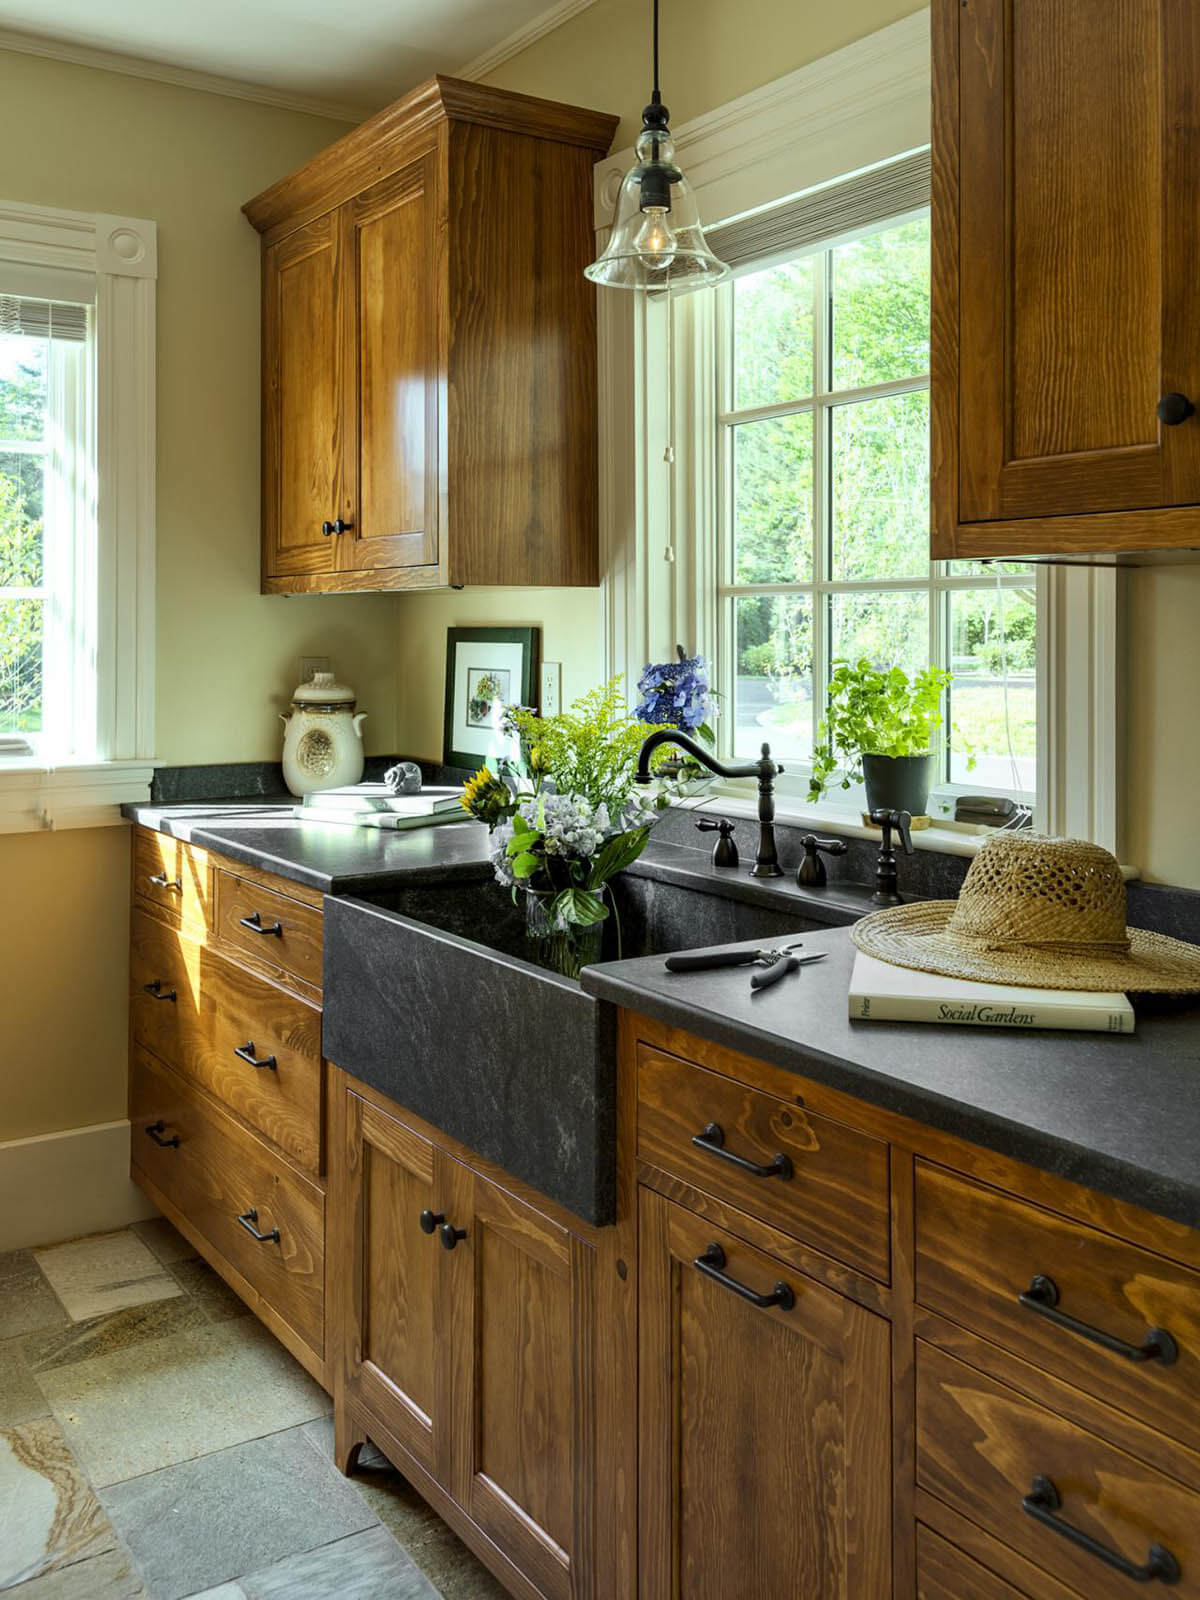 Country kitchen cabinets